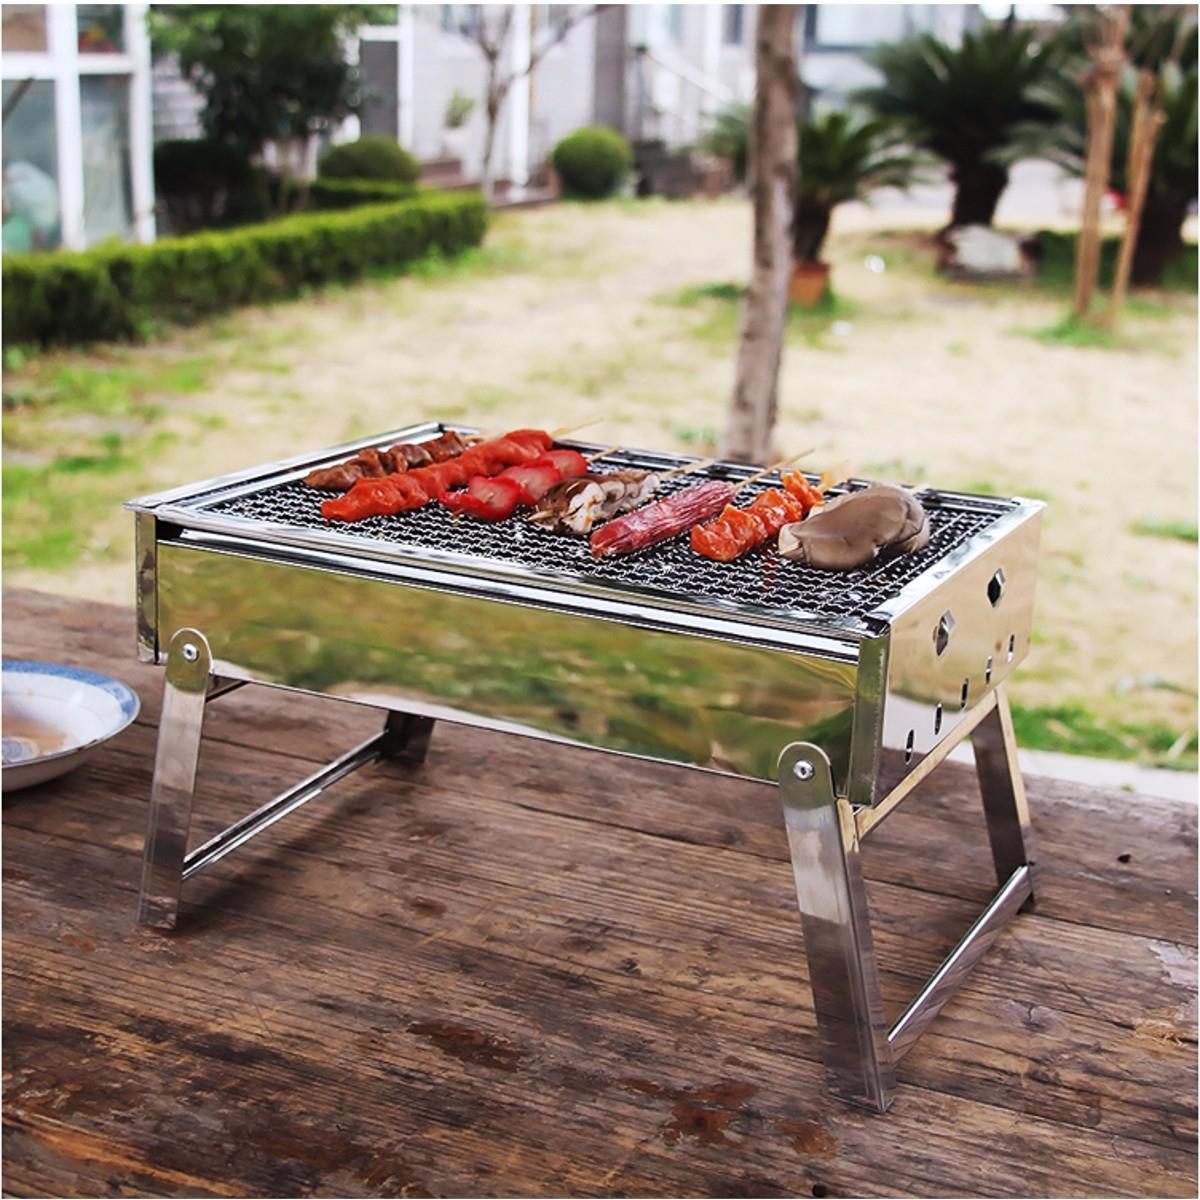 https://www.sohoemporium.com/cdn/shop/products/Portable-Grill-Rack-Stainless-Steel-Stove-Pan-Outdoor-Roaster-Outdoor-Charcoal-Barbecue-Home-Oven-Set-Cooking.jpg?v=1562952877